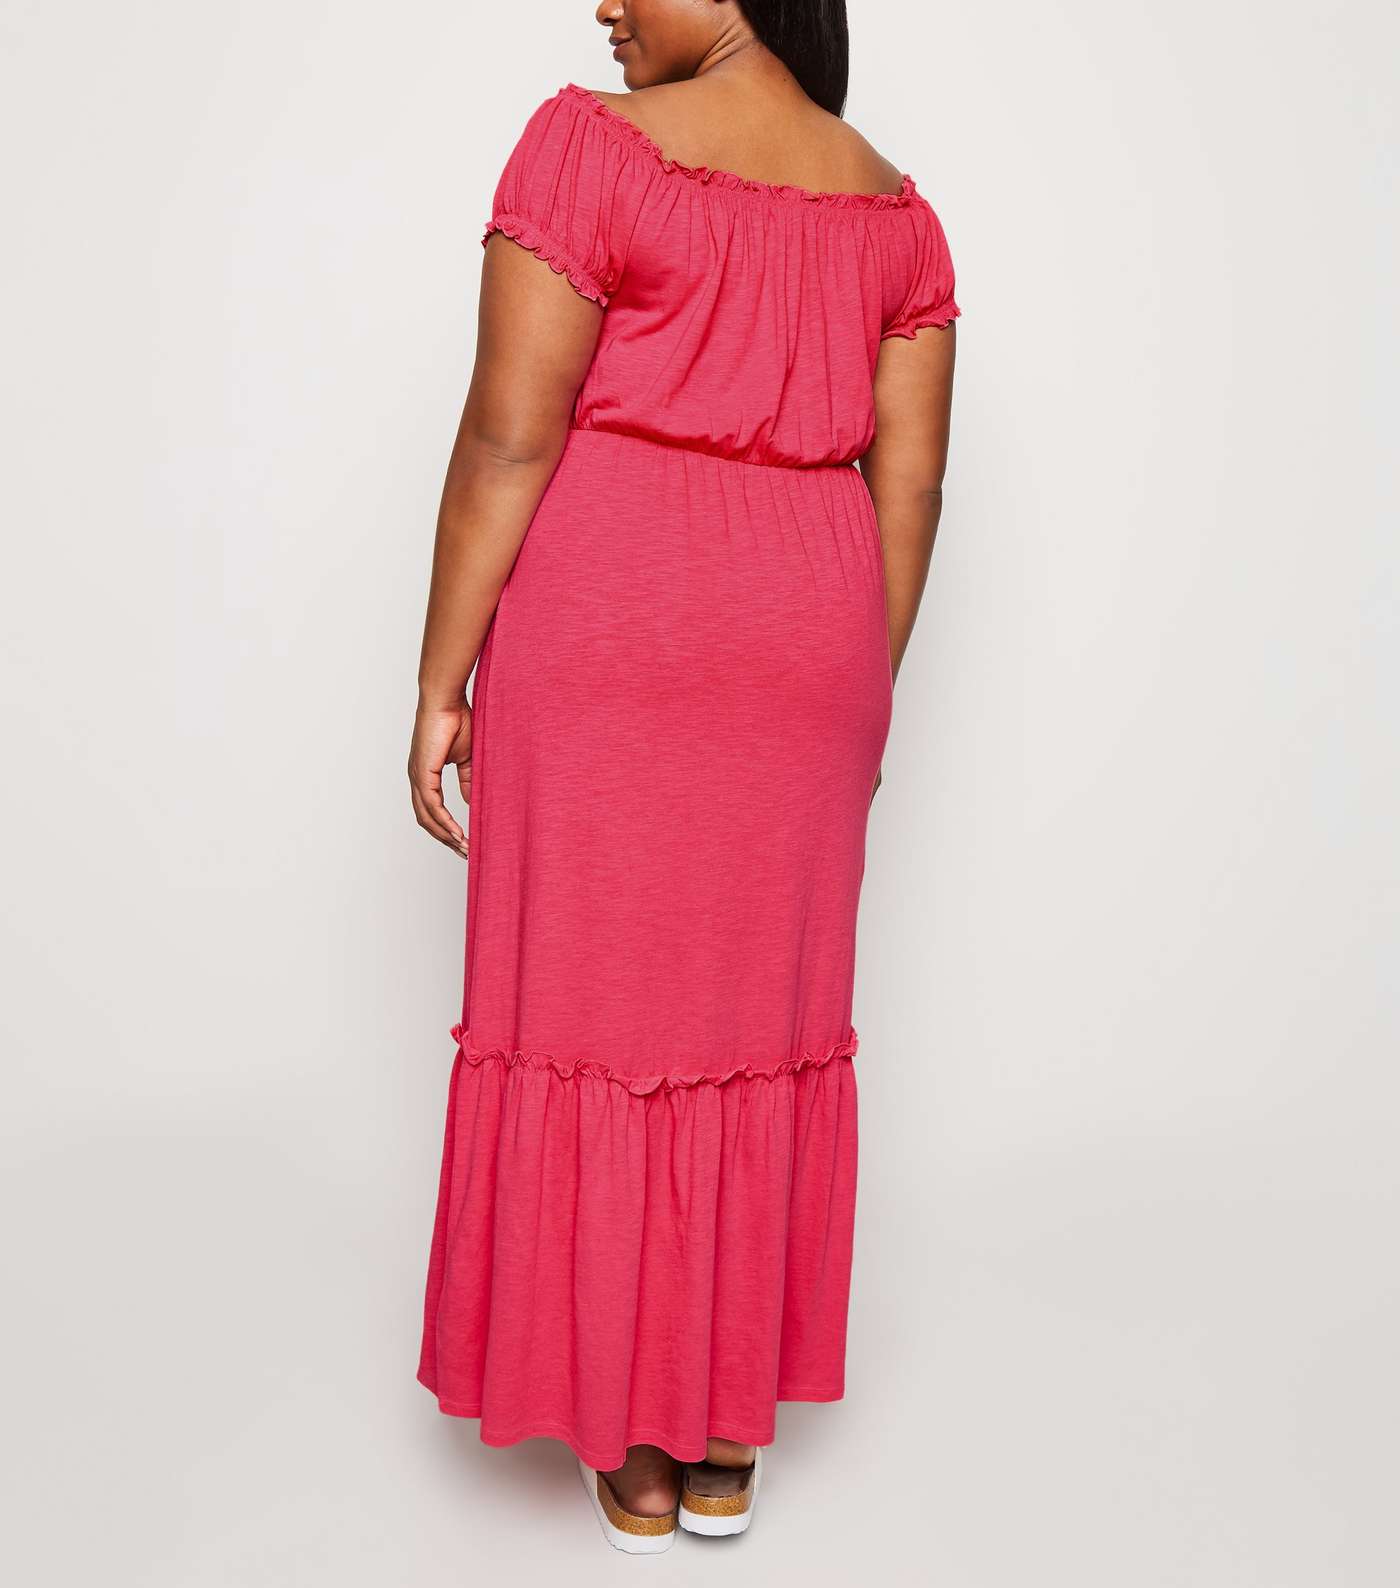 Curves Bright Pink Neon Jersey Maxi Dress Image 2